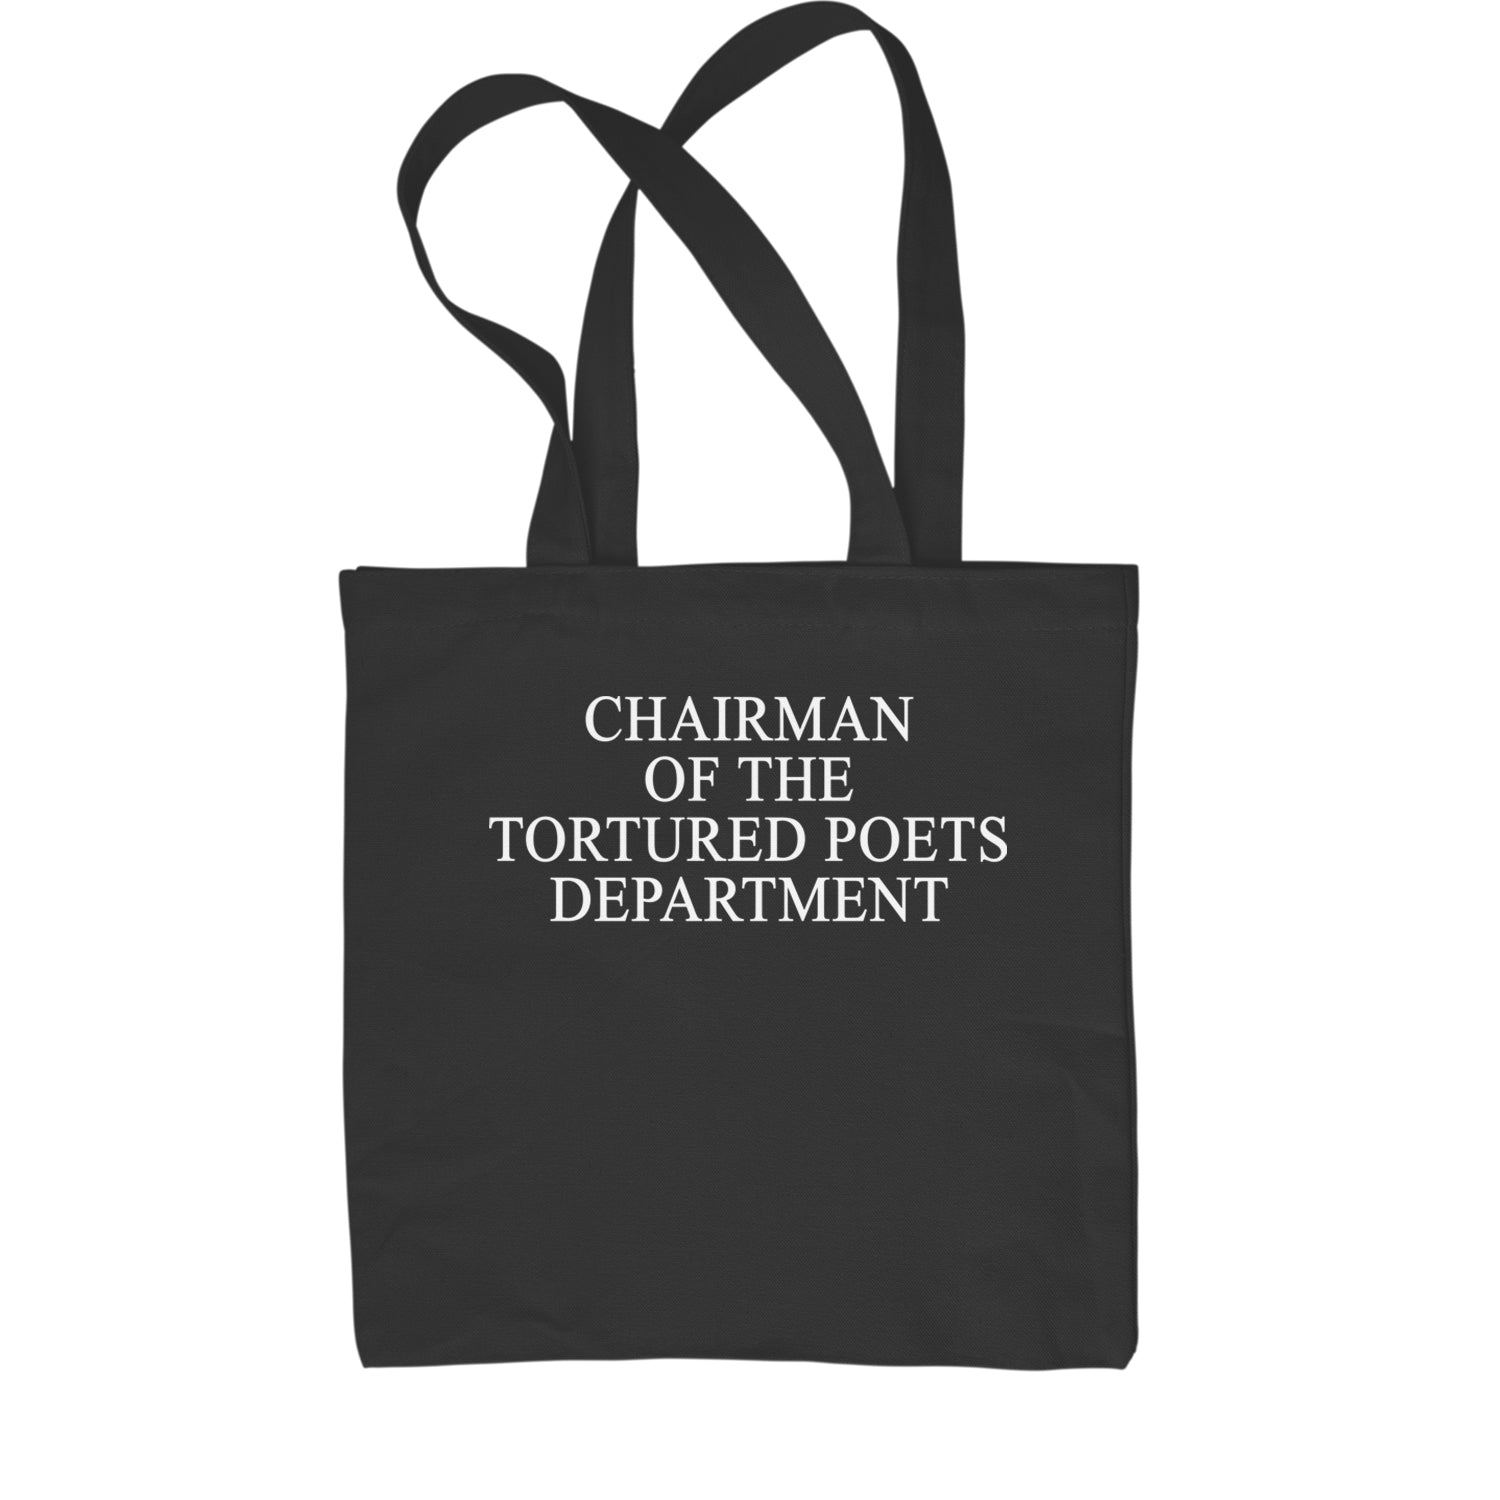 Chairman Of The Tortured Poets Department Shopping Tote Bag